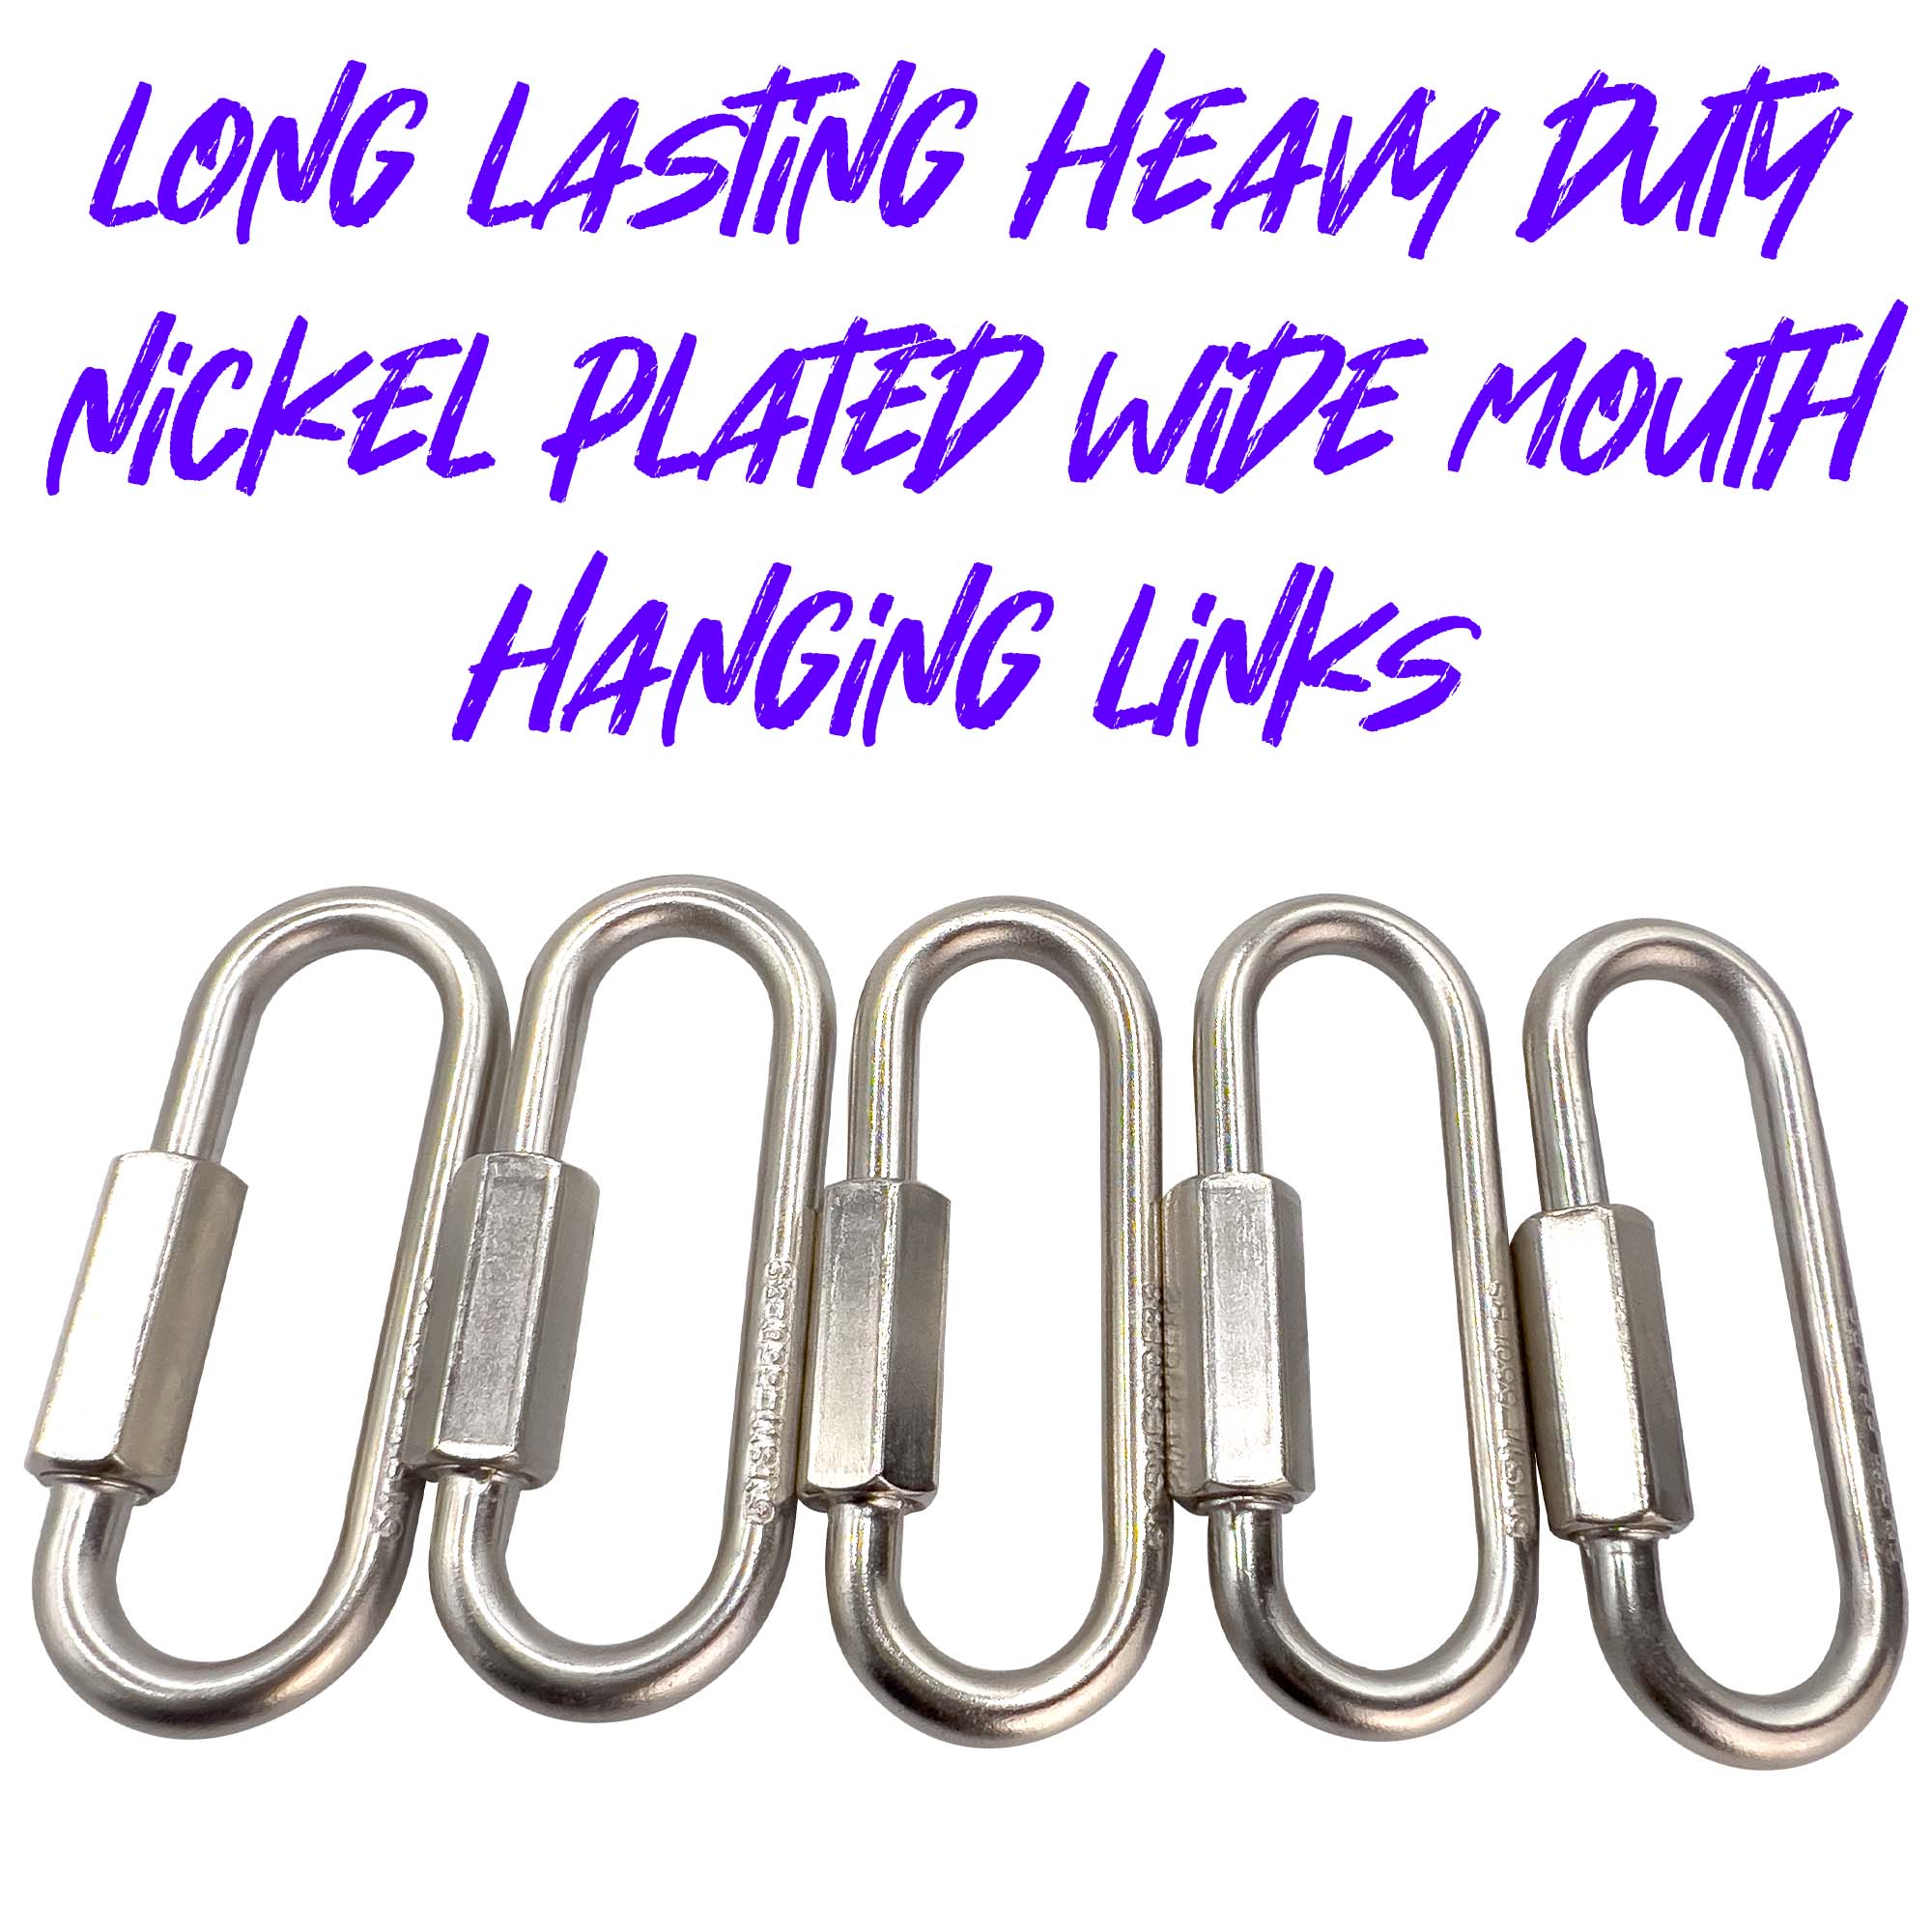 7007 Nickel Plated 2.5 Inch Wide Mouth Toy Quick Link